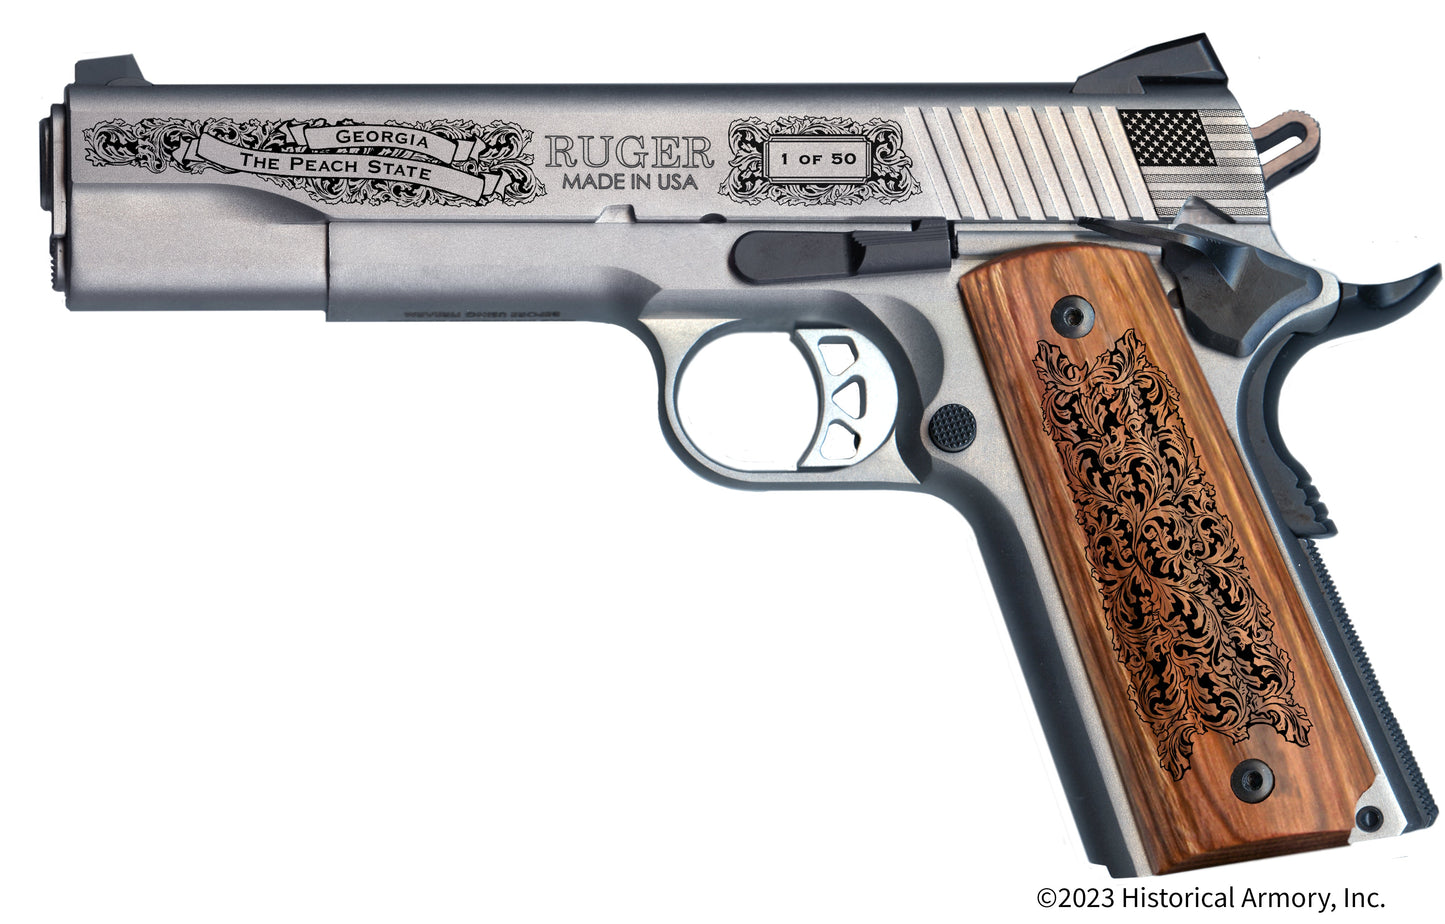 Richmond County Georgia Engraved .45 Auto Ruger 1911